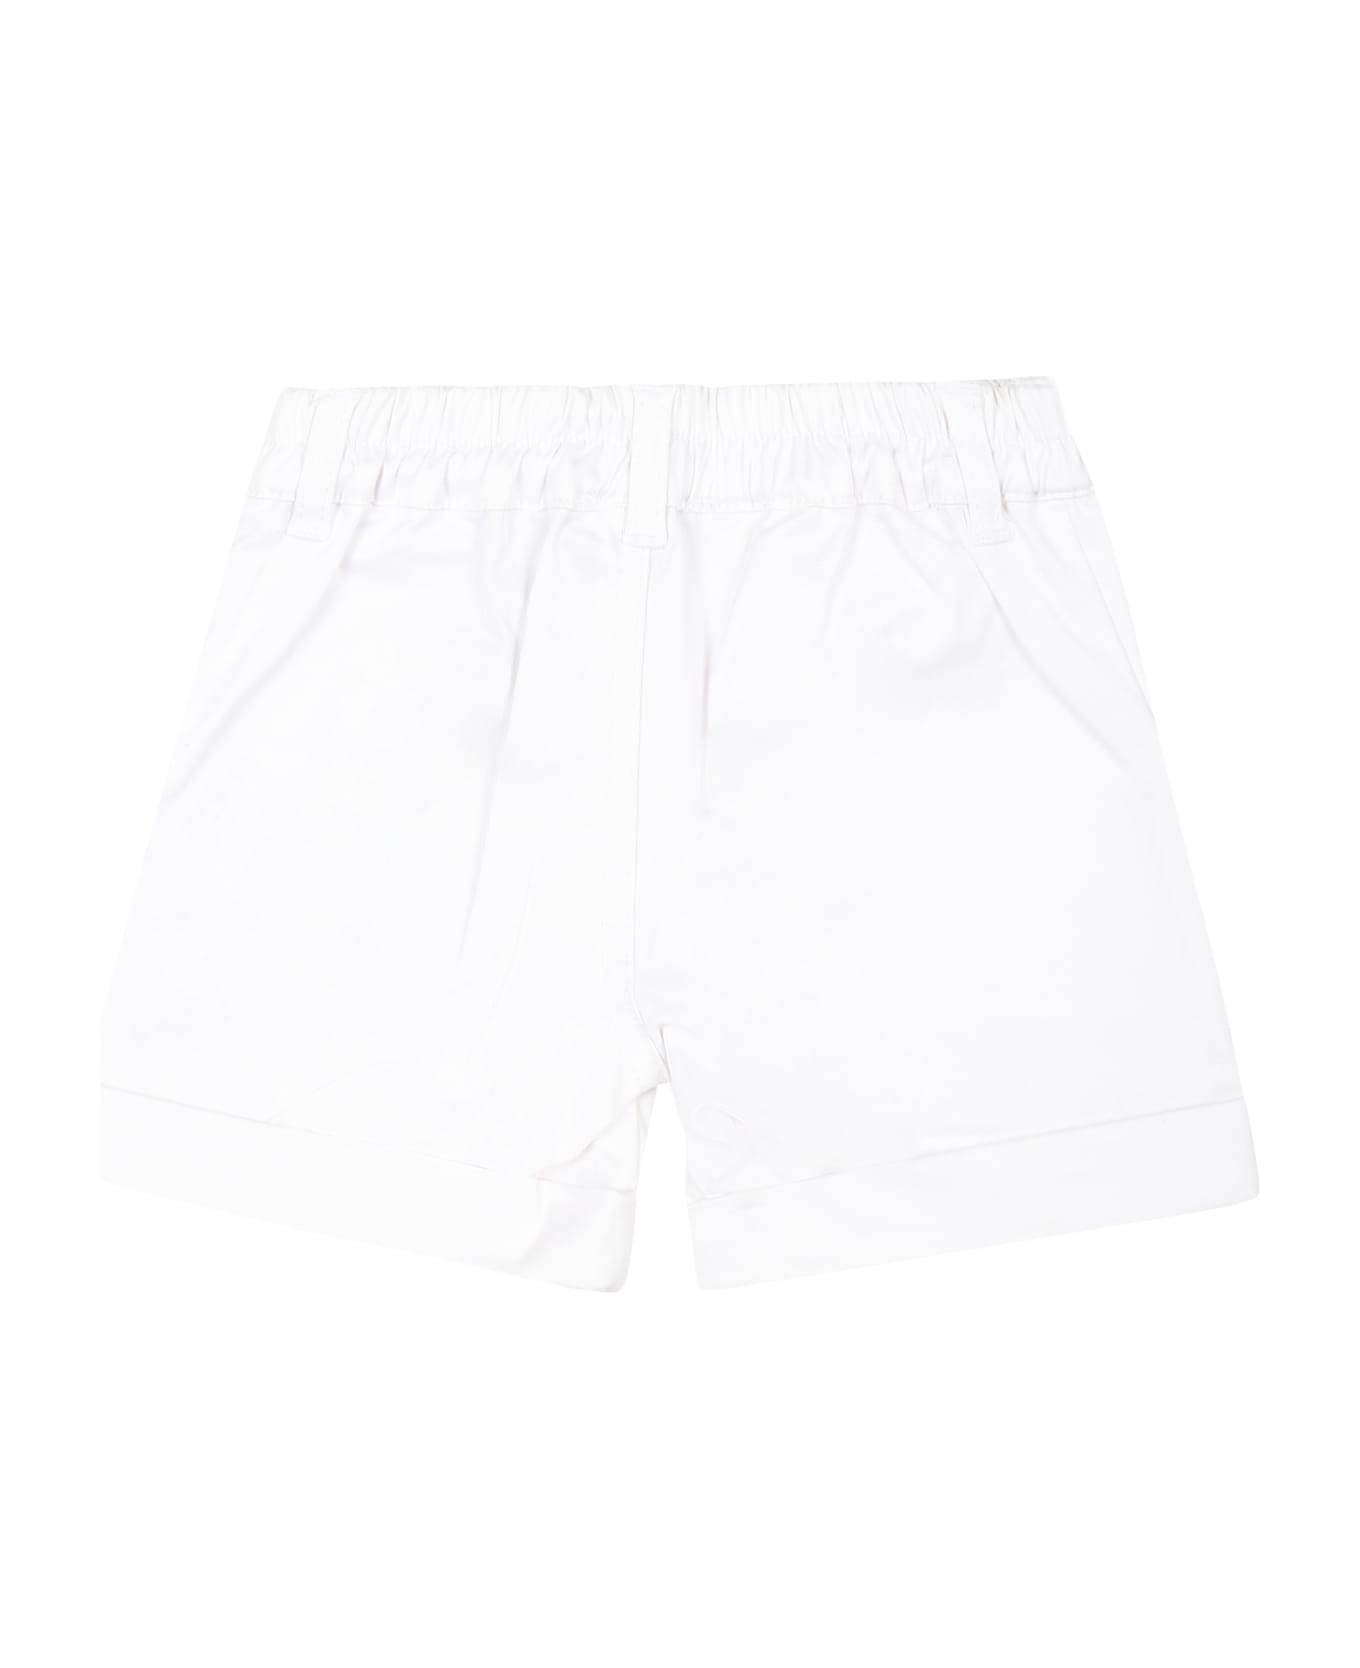 Moschino White Shorts For Baby Boy With Teddy Bear And Logo - White ボトムス